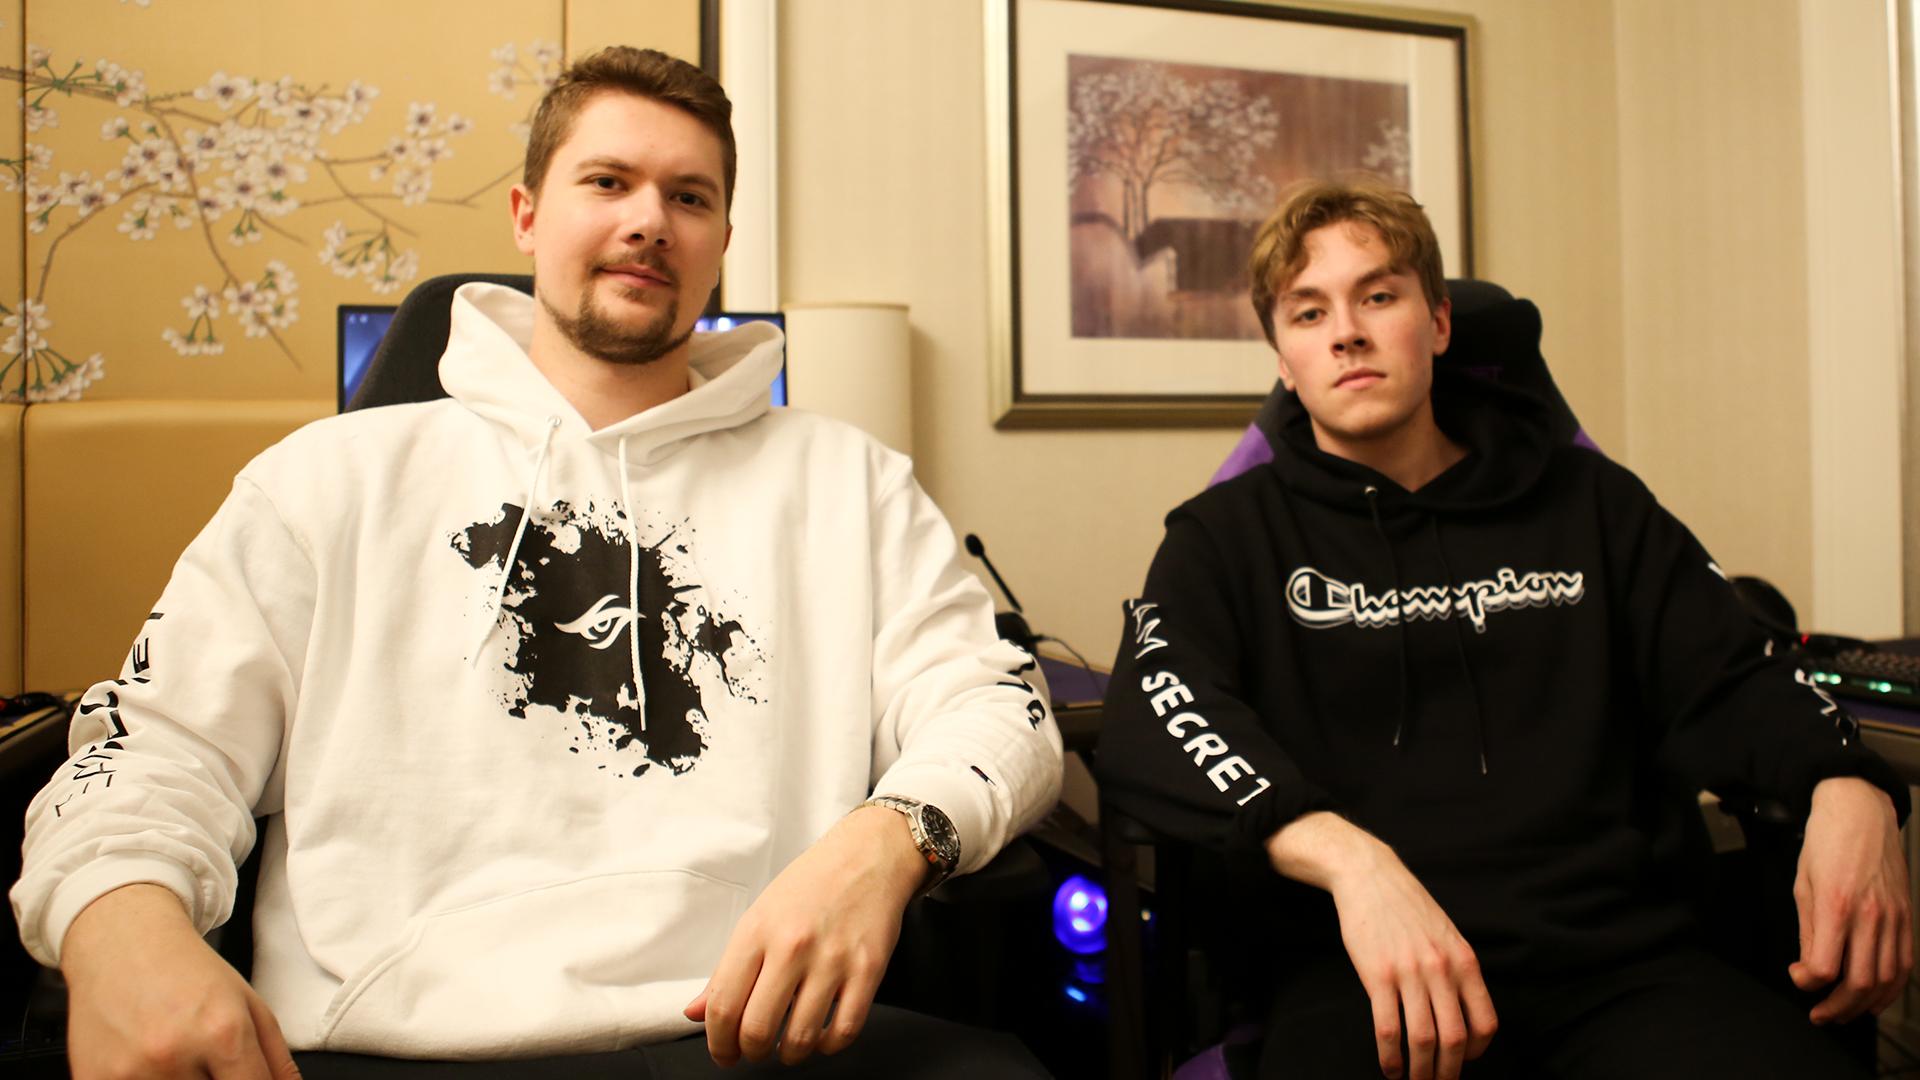 Team Secret on "Keep the likes and retweets equal and we'll giveaway a x Champion hoodie." / Twitter